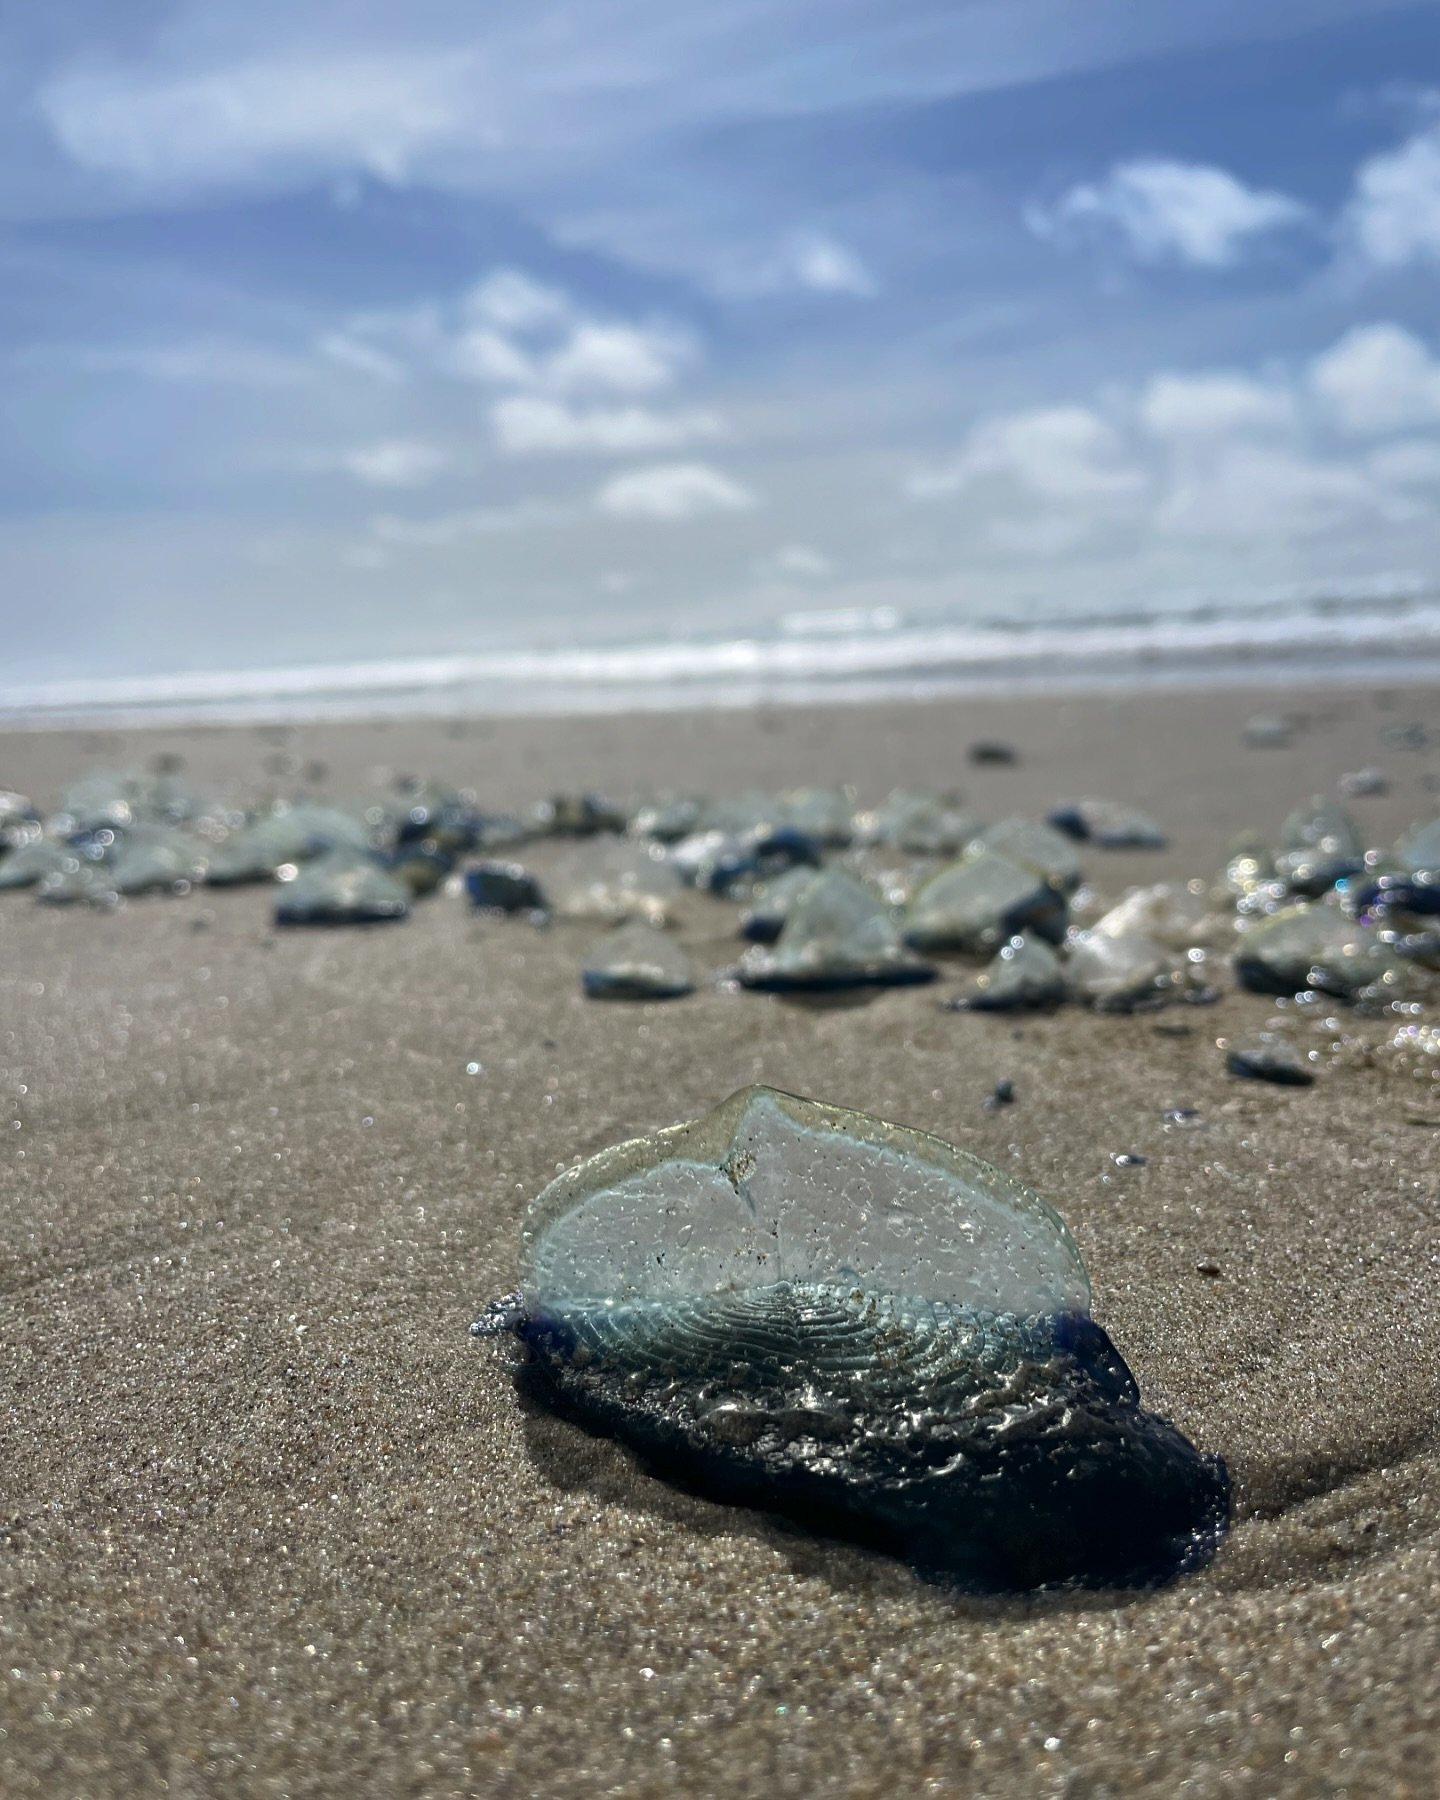 🌊✨ Discover the Blue Wonders of Yachats! ✨🌊

Have you ever stumbled upon a beach adorned with tiny blue sailors? Meet Velella velellas, also known as by-the-wind sailors, these fascinating creatures are a seasonal spectacle along the coast.

🔵 Wha